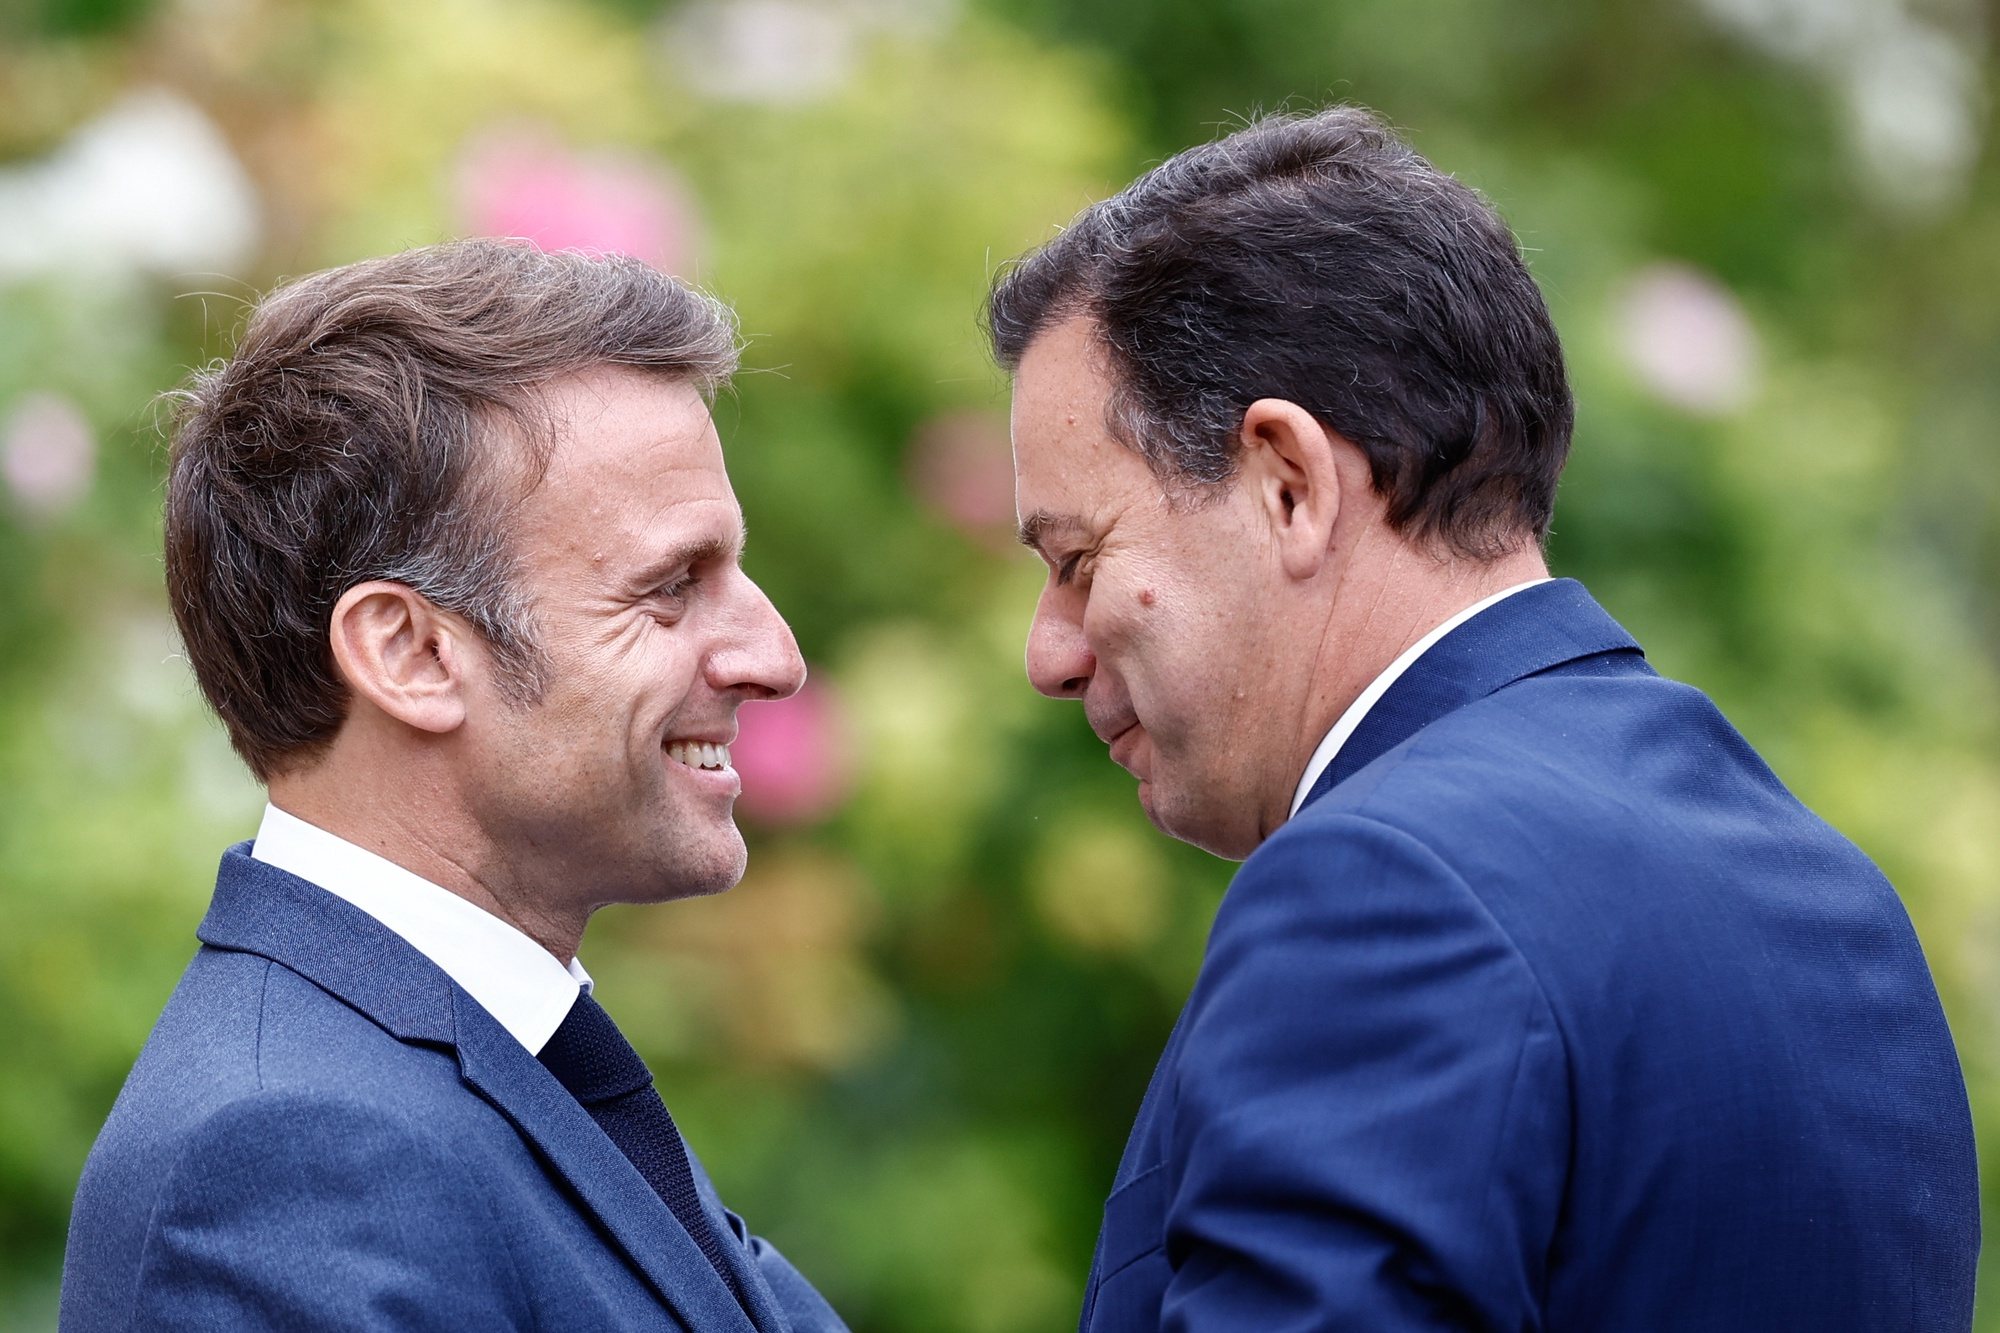 epa11422287 French President Emmanuel Macron (L) welcomes Portuguese Prime Minister Luis Montenegro before a working lunch at the Elysee Palace in Paris, France, 19 June 2024. According to the Elysee Palace press release, the two leaders&#039; meeting focused on the strategic agenda of the European Union ahead of the European Council on 27 and 28 June, as well as international issues, such as the situation in Ukraine and the Middle East.  EPA/MOHAMMED BADRA